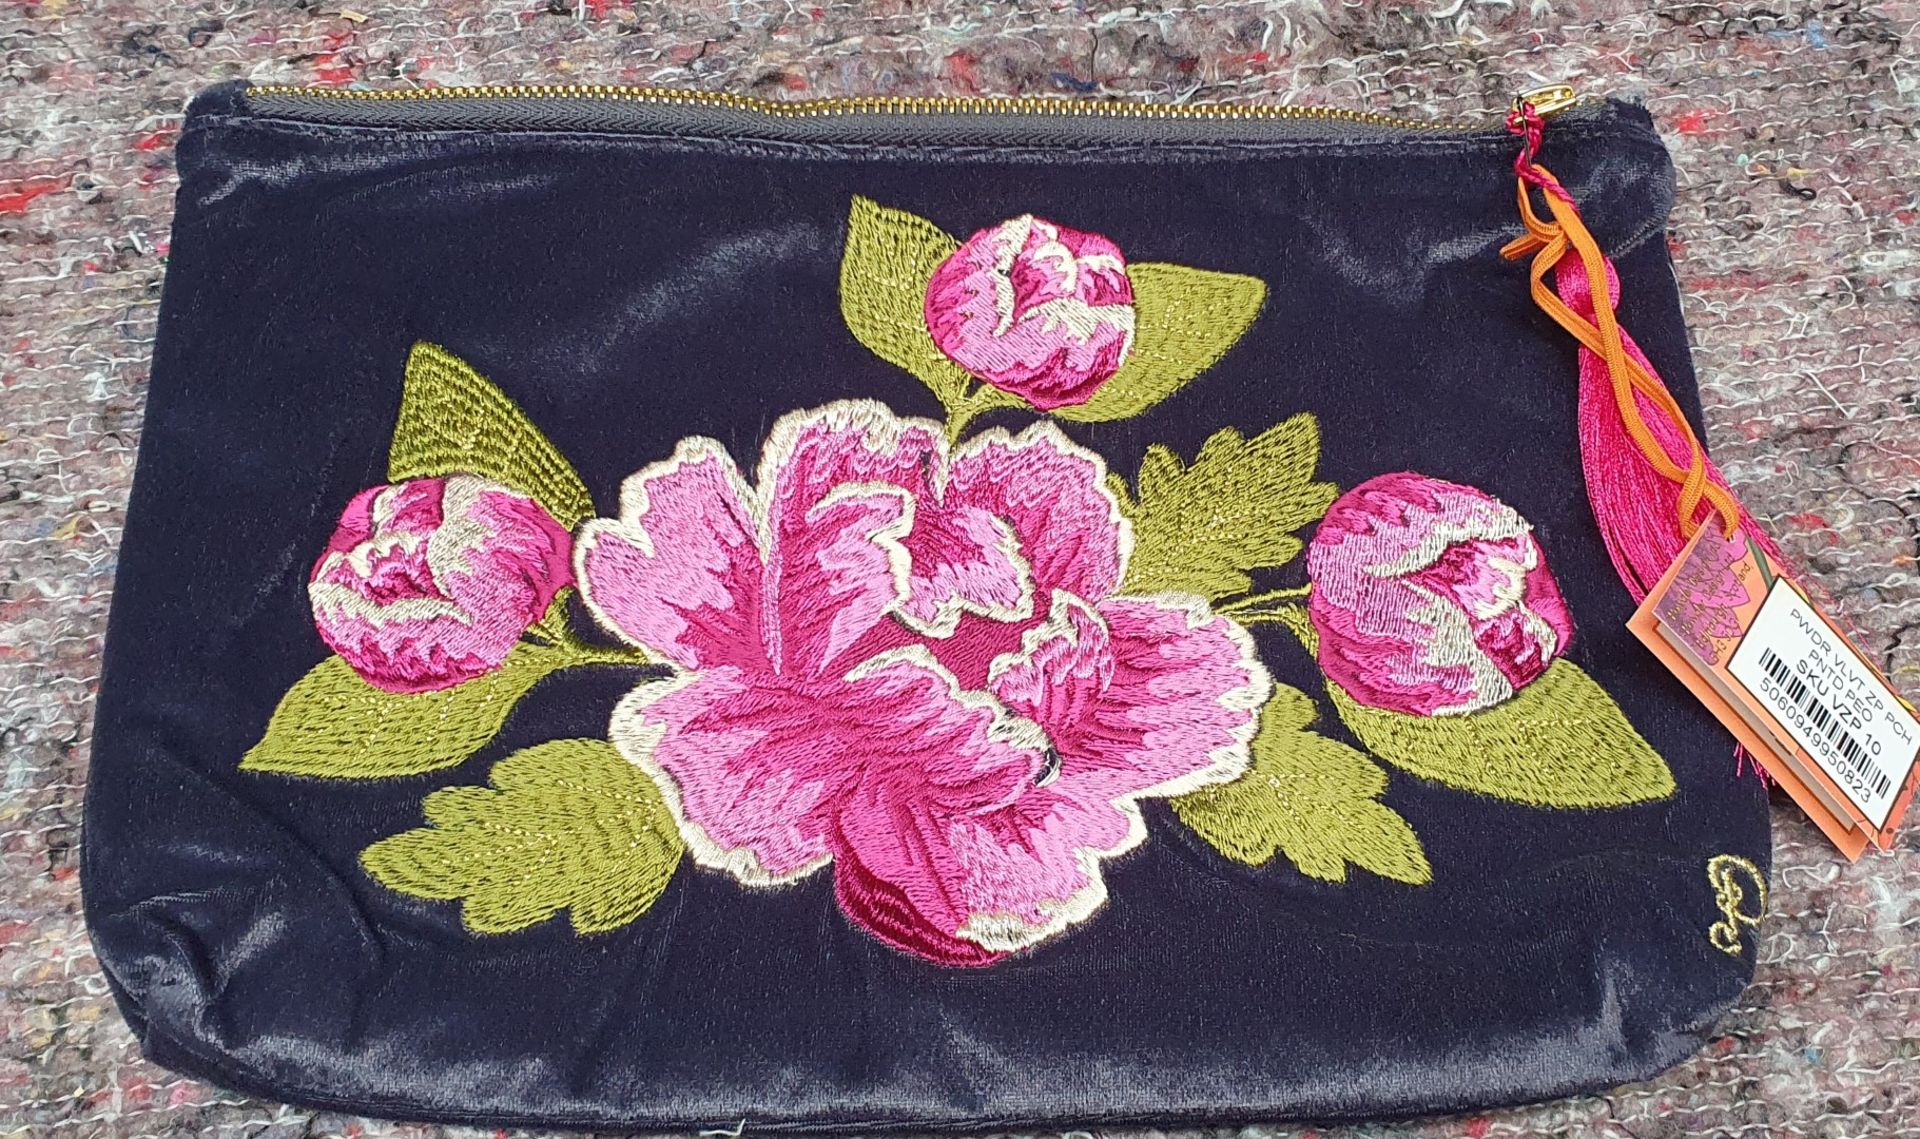 5 x Toiletries Bags By Powder Featuring a Velvet Material and Animal / Floral Stitched Designs - New - Image 6 of 7